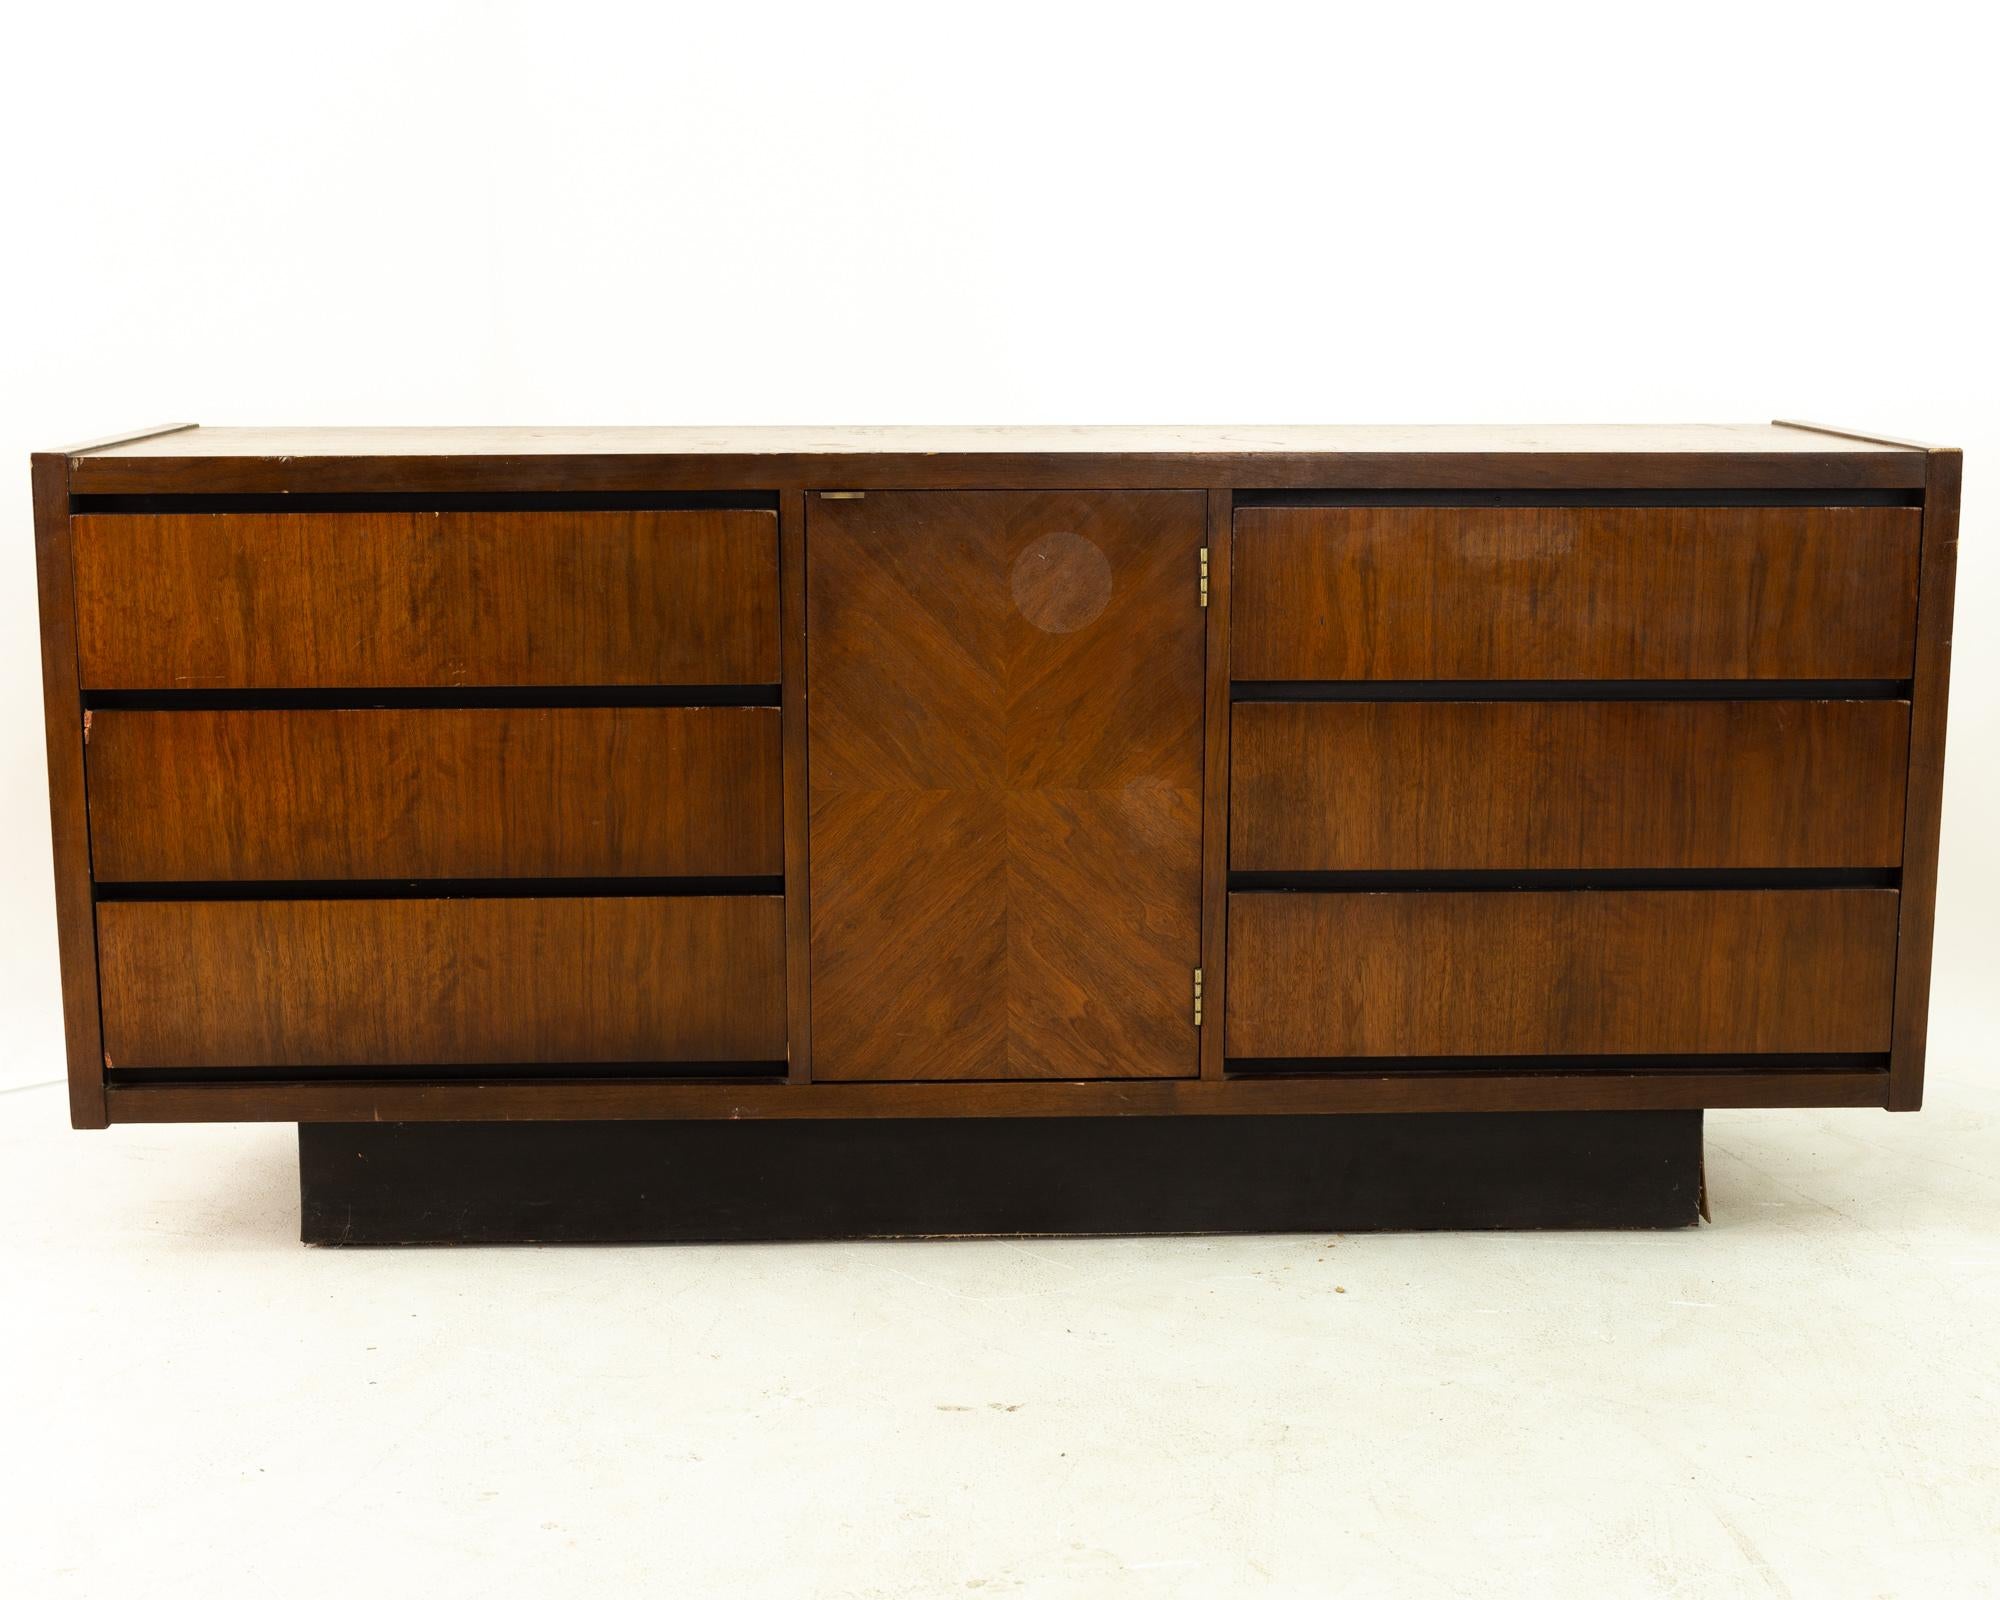 Lane Mid Century walnut 6 drawer lowboy dresser on plinth base 
Measures: 66 wide x 18 deep x 29 high

All pieces of furniture can be had in what we call restored vintage condition. This means the piece is restored upon purchase so it’s free of